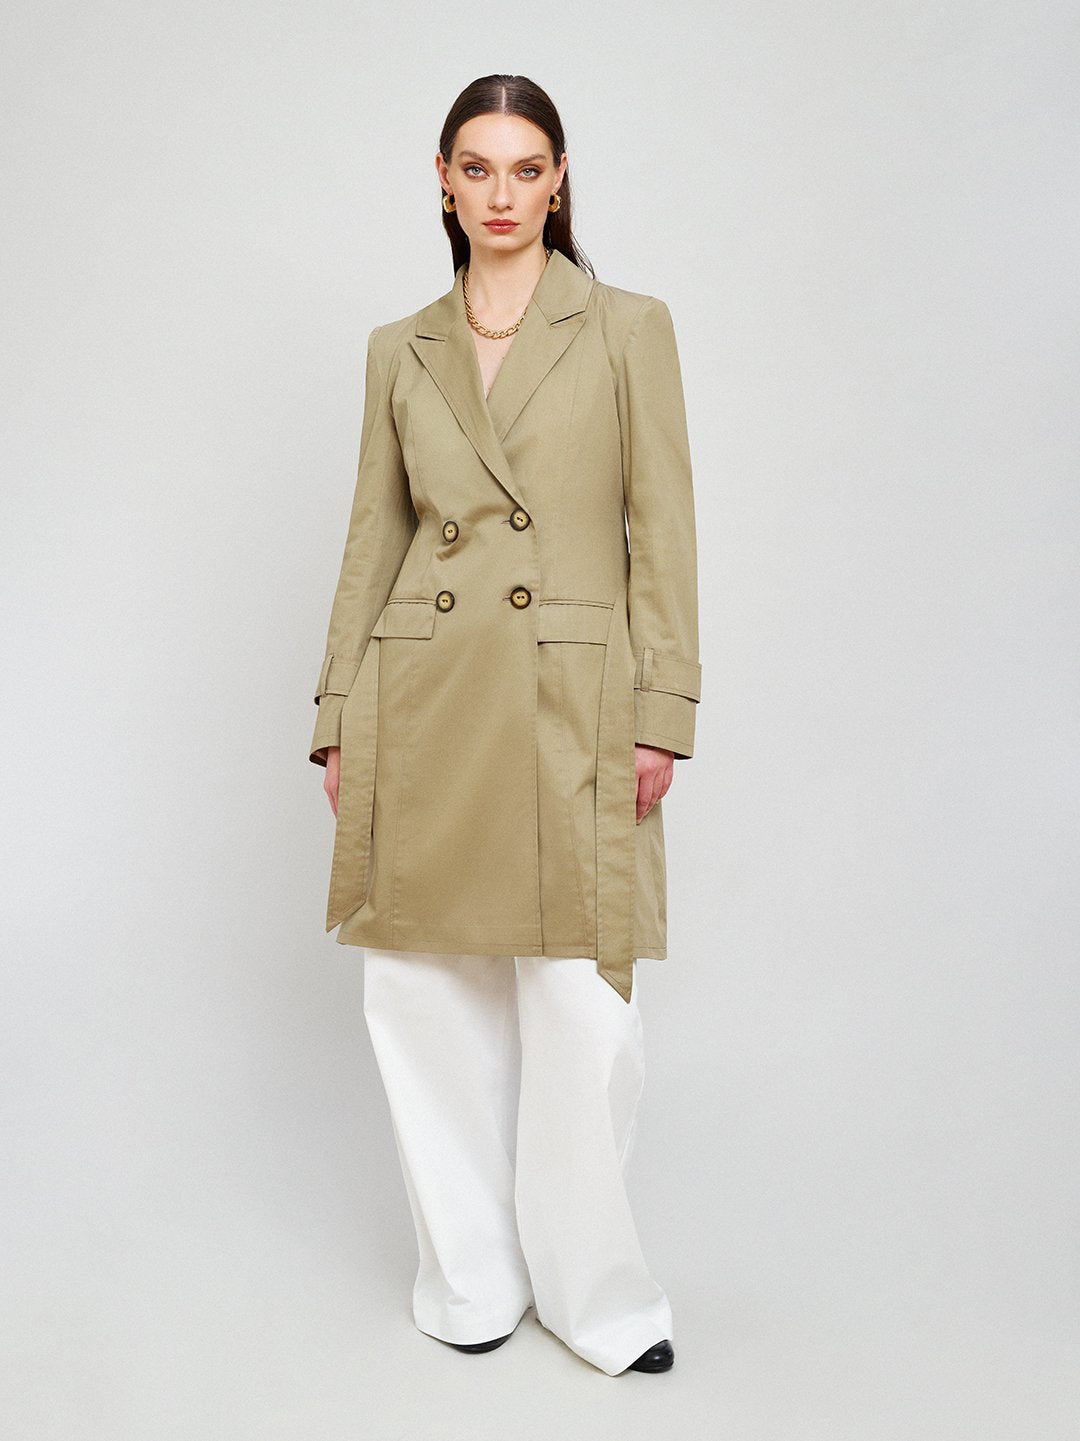 The Modern Trench - AMILLI at LabelRow